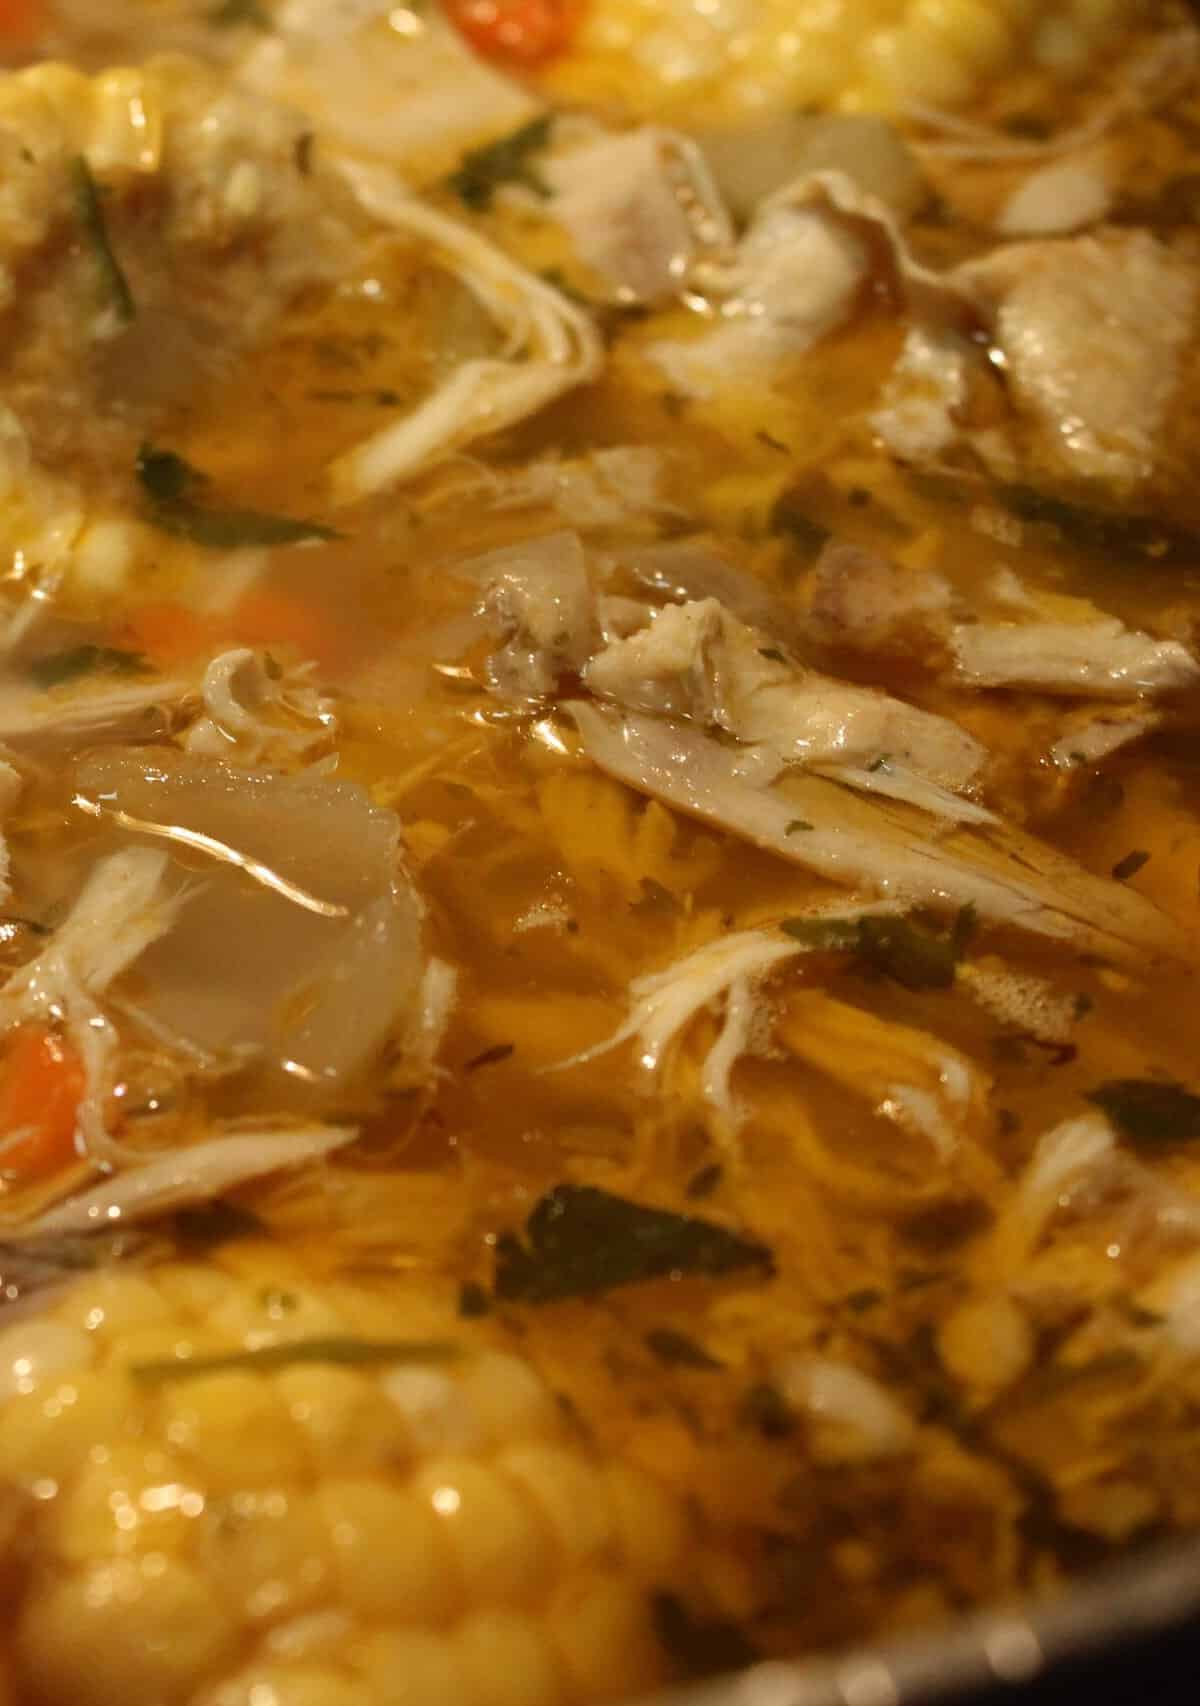  This chicken soup is the ultimate match for a cold winter day.